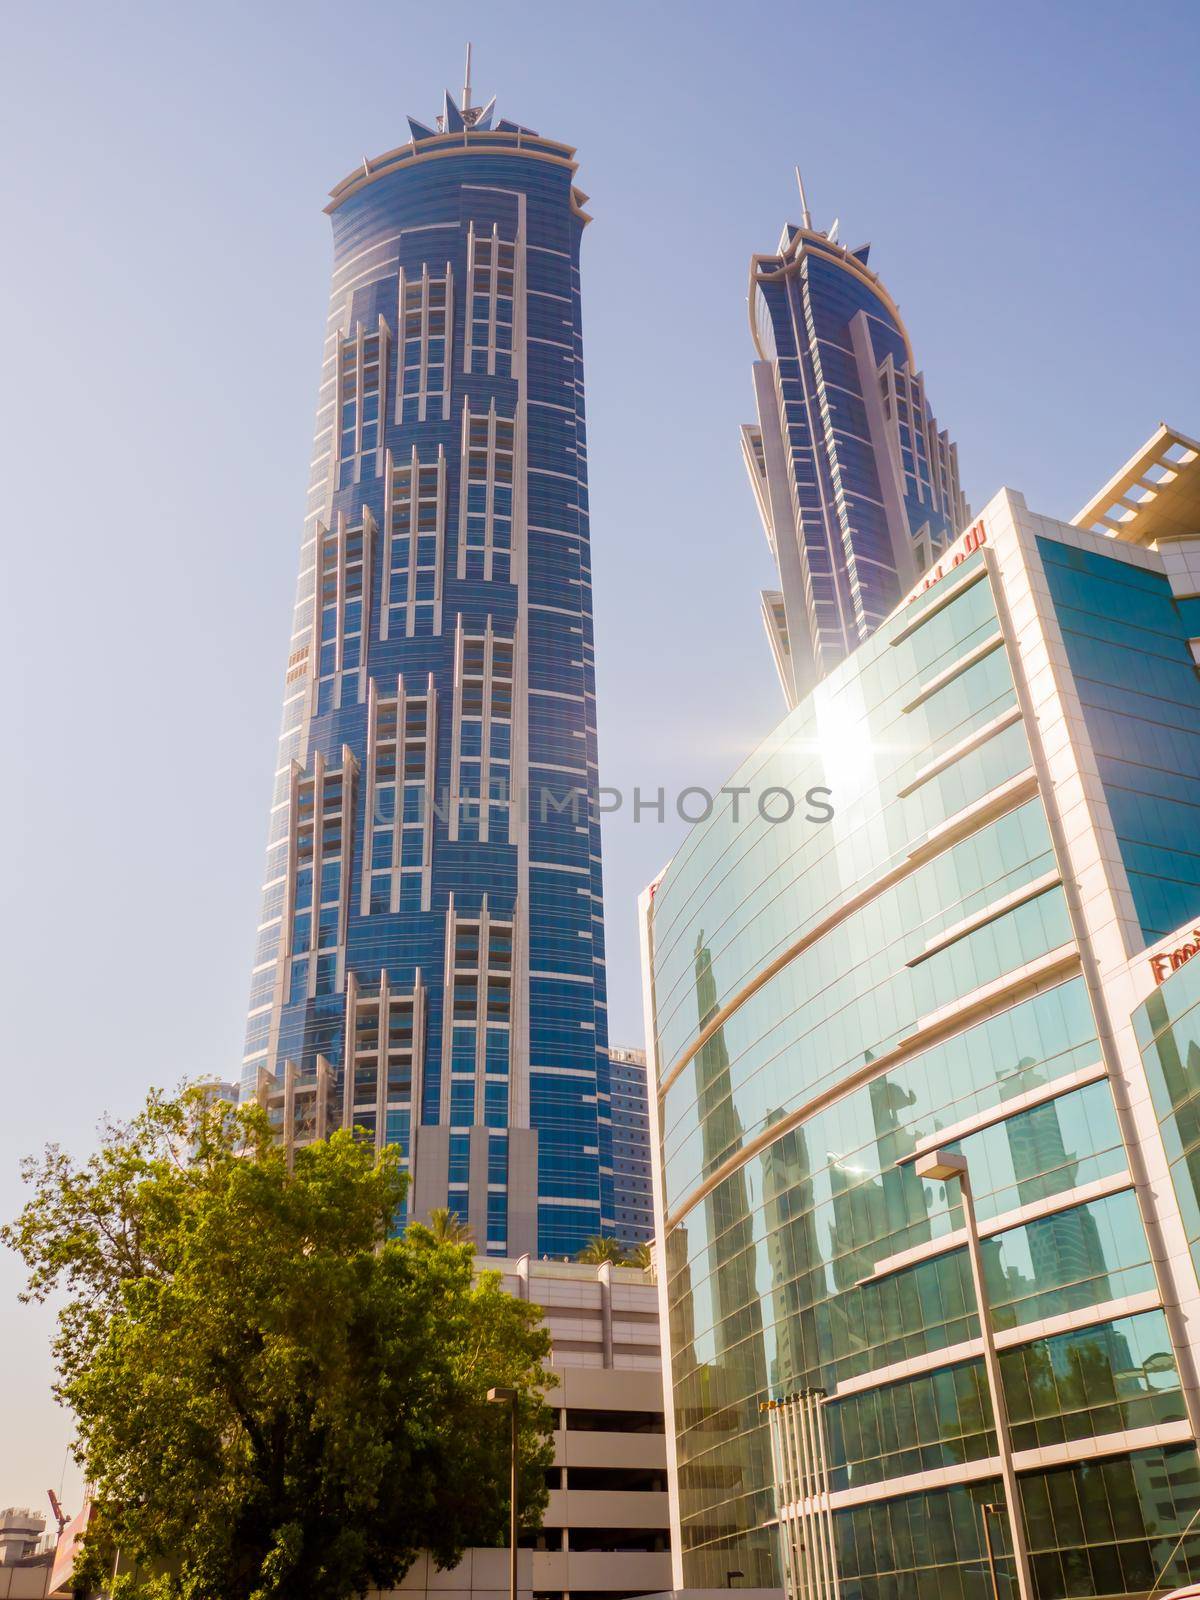 Dubai, UAE - May 15, 2018: Streets with modern skyscrapers of the city of Dubai by DovidPro